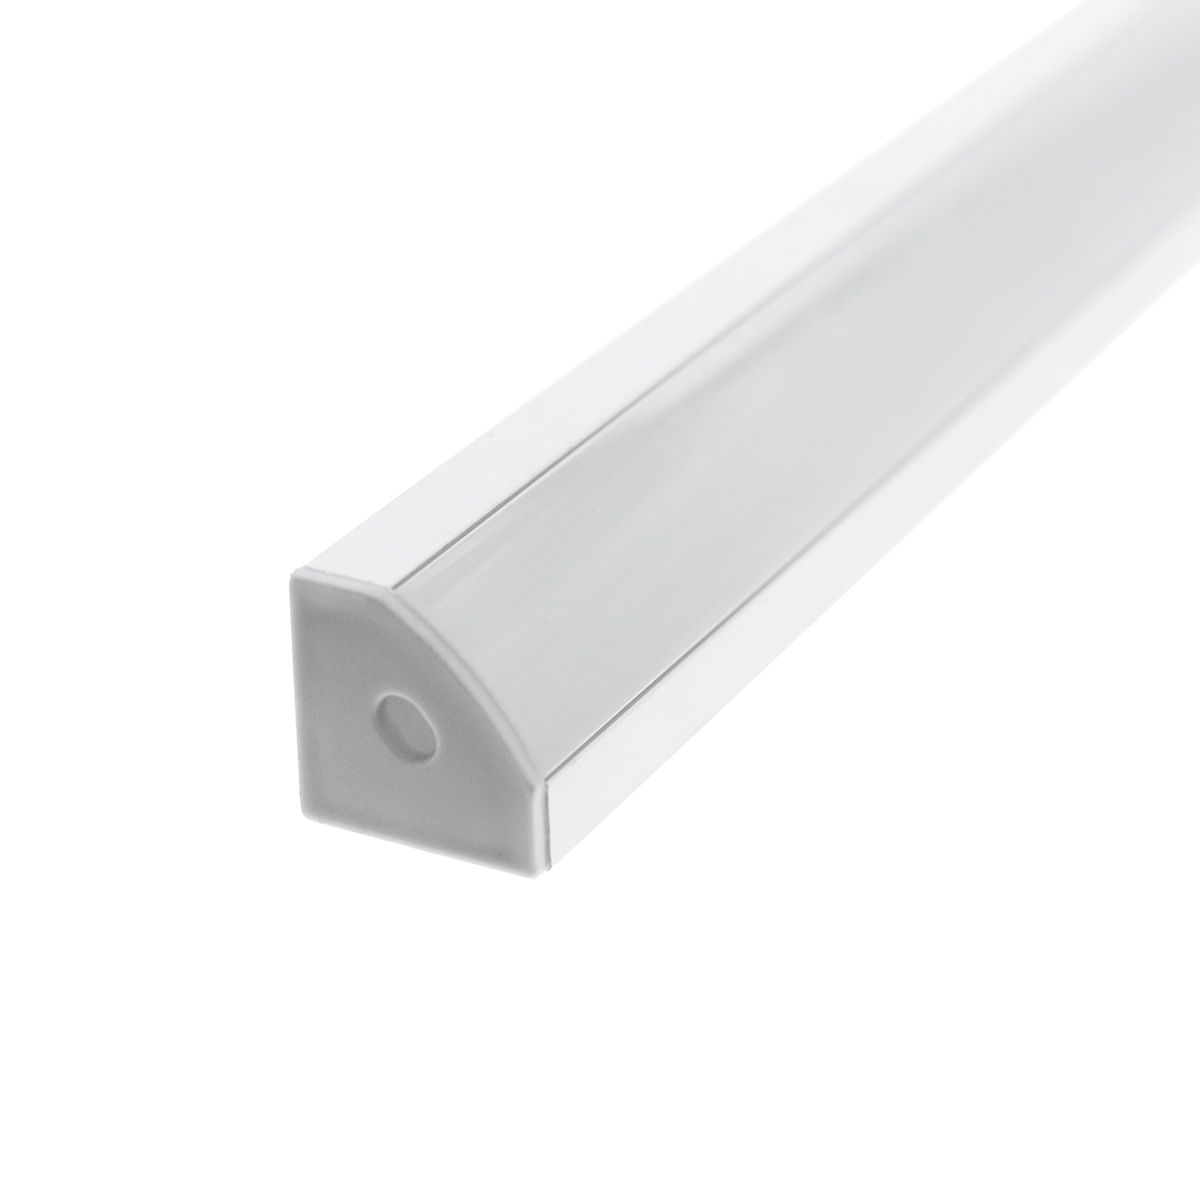 NOBLE ELECTRICALS Aluminium Profile/Channel For Led Light Strips (Pack Of  5, , Rectangular, Off White) 1 Metre Each Profiles With End Caps